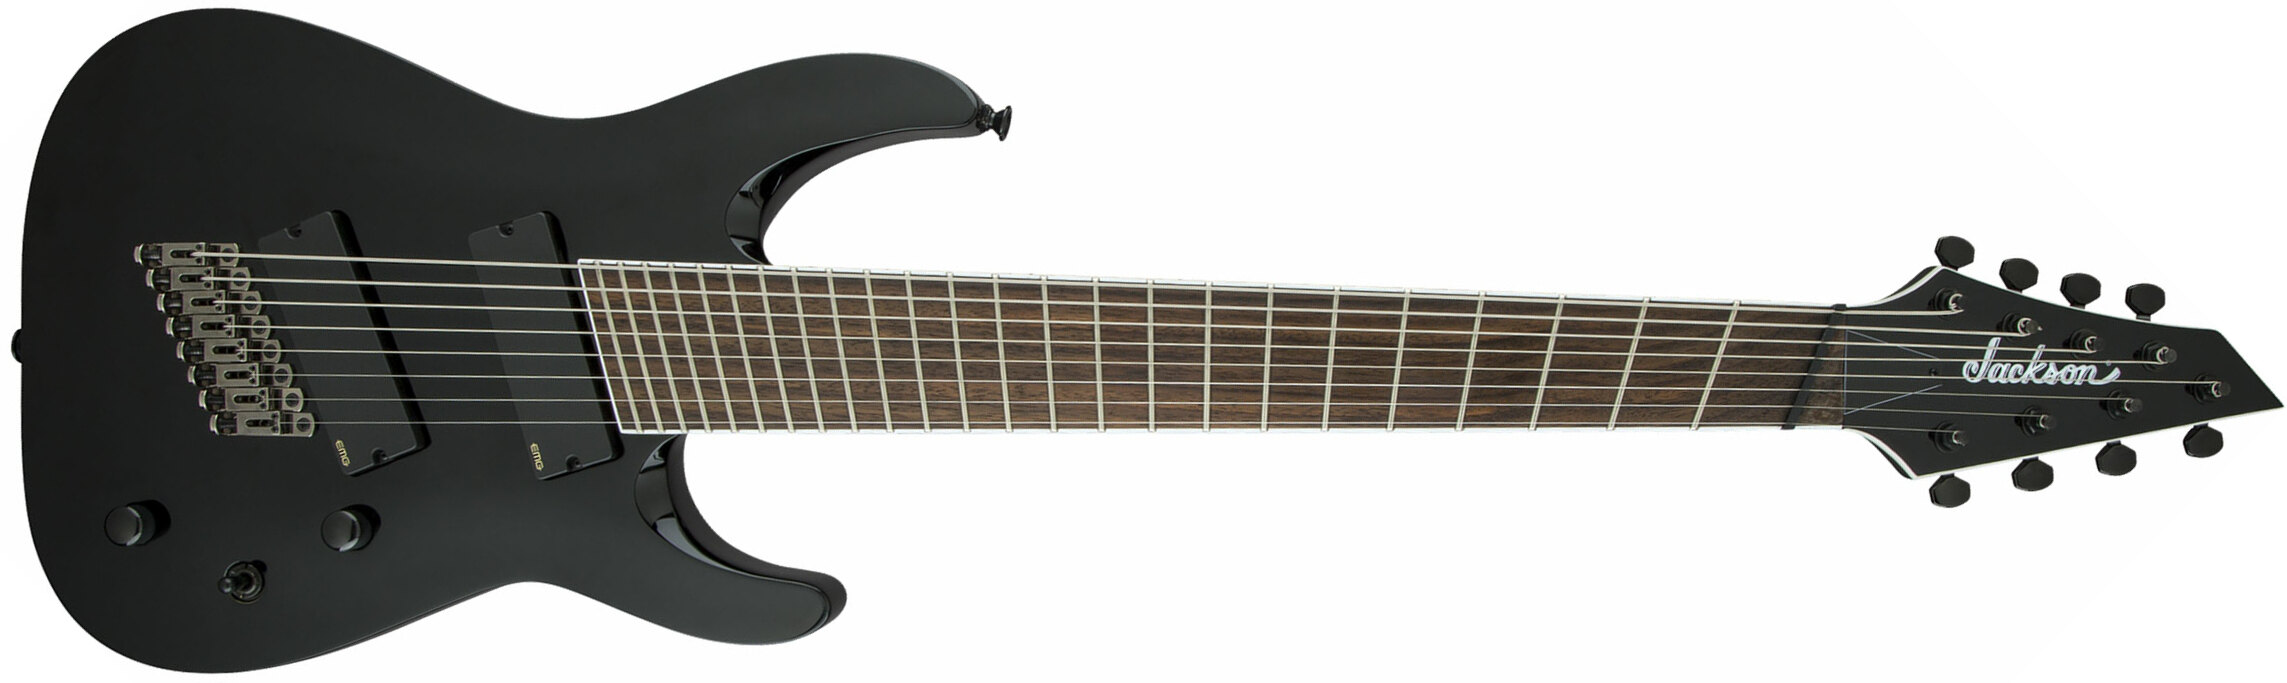 Jackson Soloist Arch Top Slat8 Ms X Mah 2h Ht Lau - Black - 8 and 9 string electric guitar - Main picture